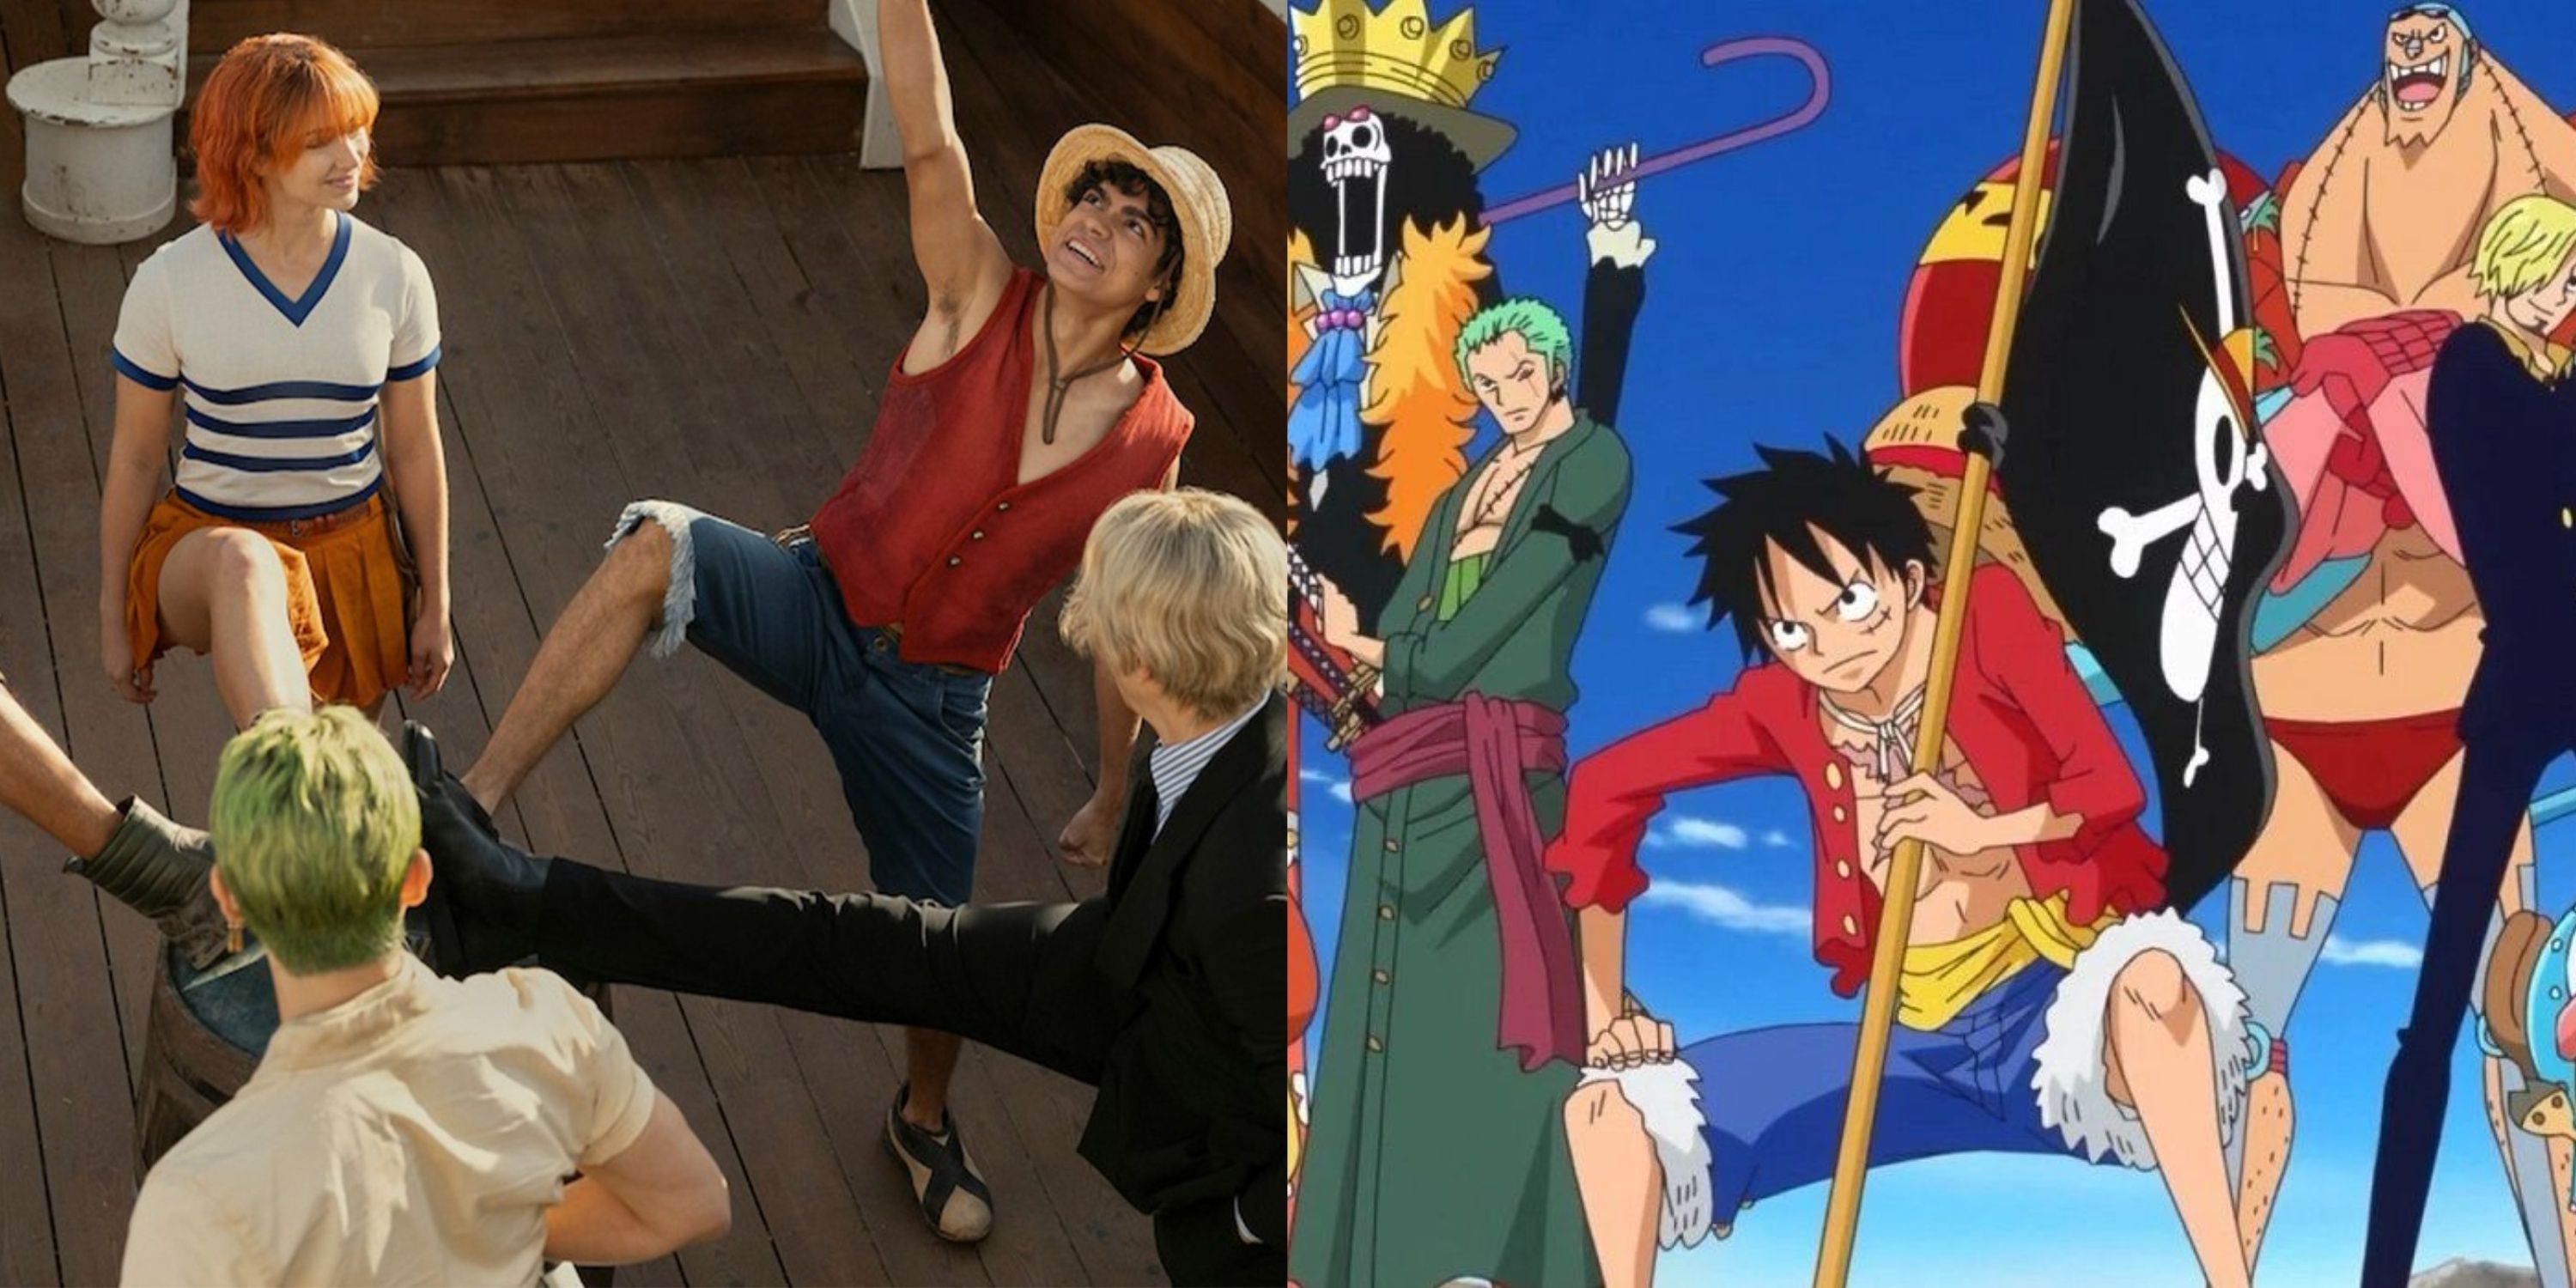 One Piece live action versus anime ending: 3 key differences